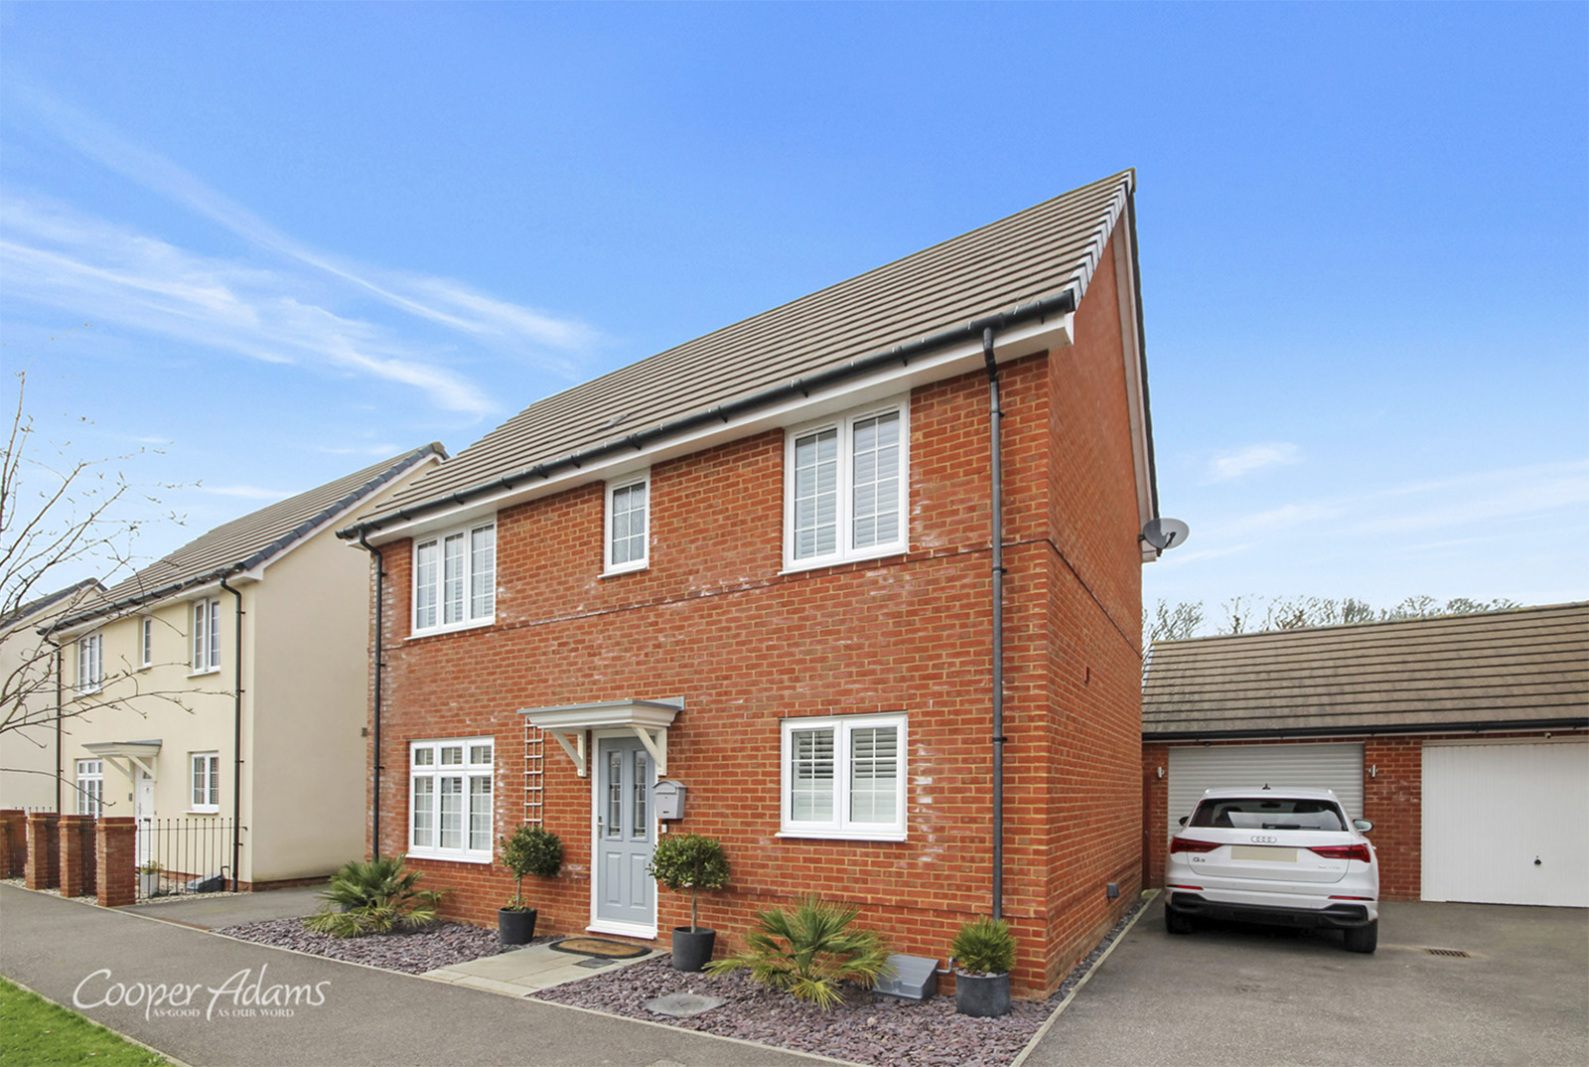 3 bed house for sale in Upperton Grove, Littlehampton - Property Image 1